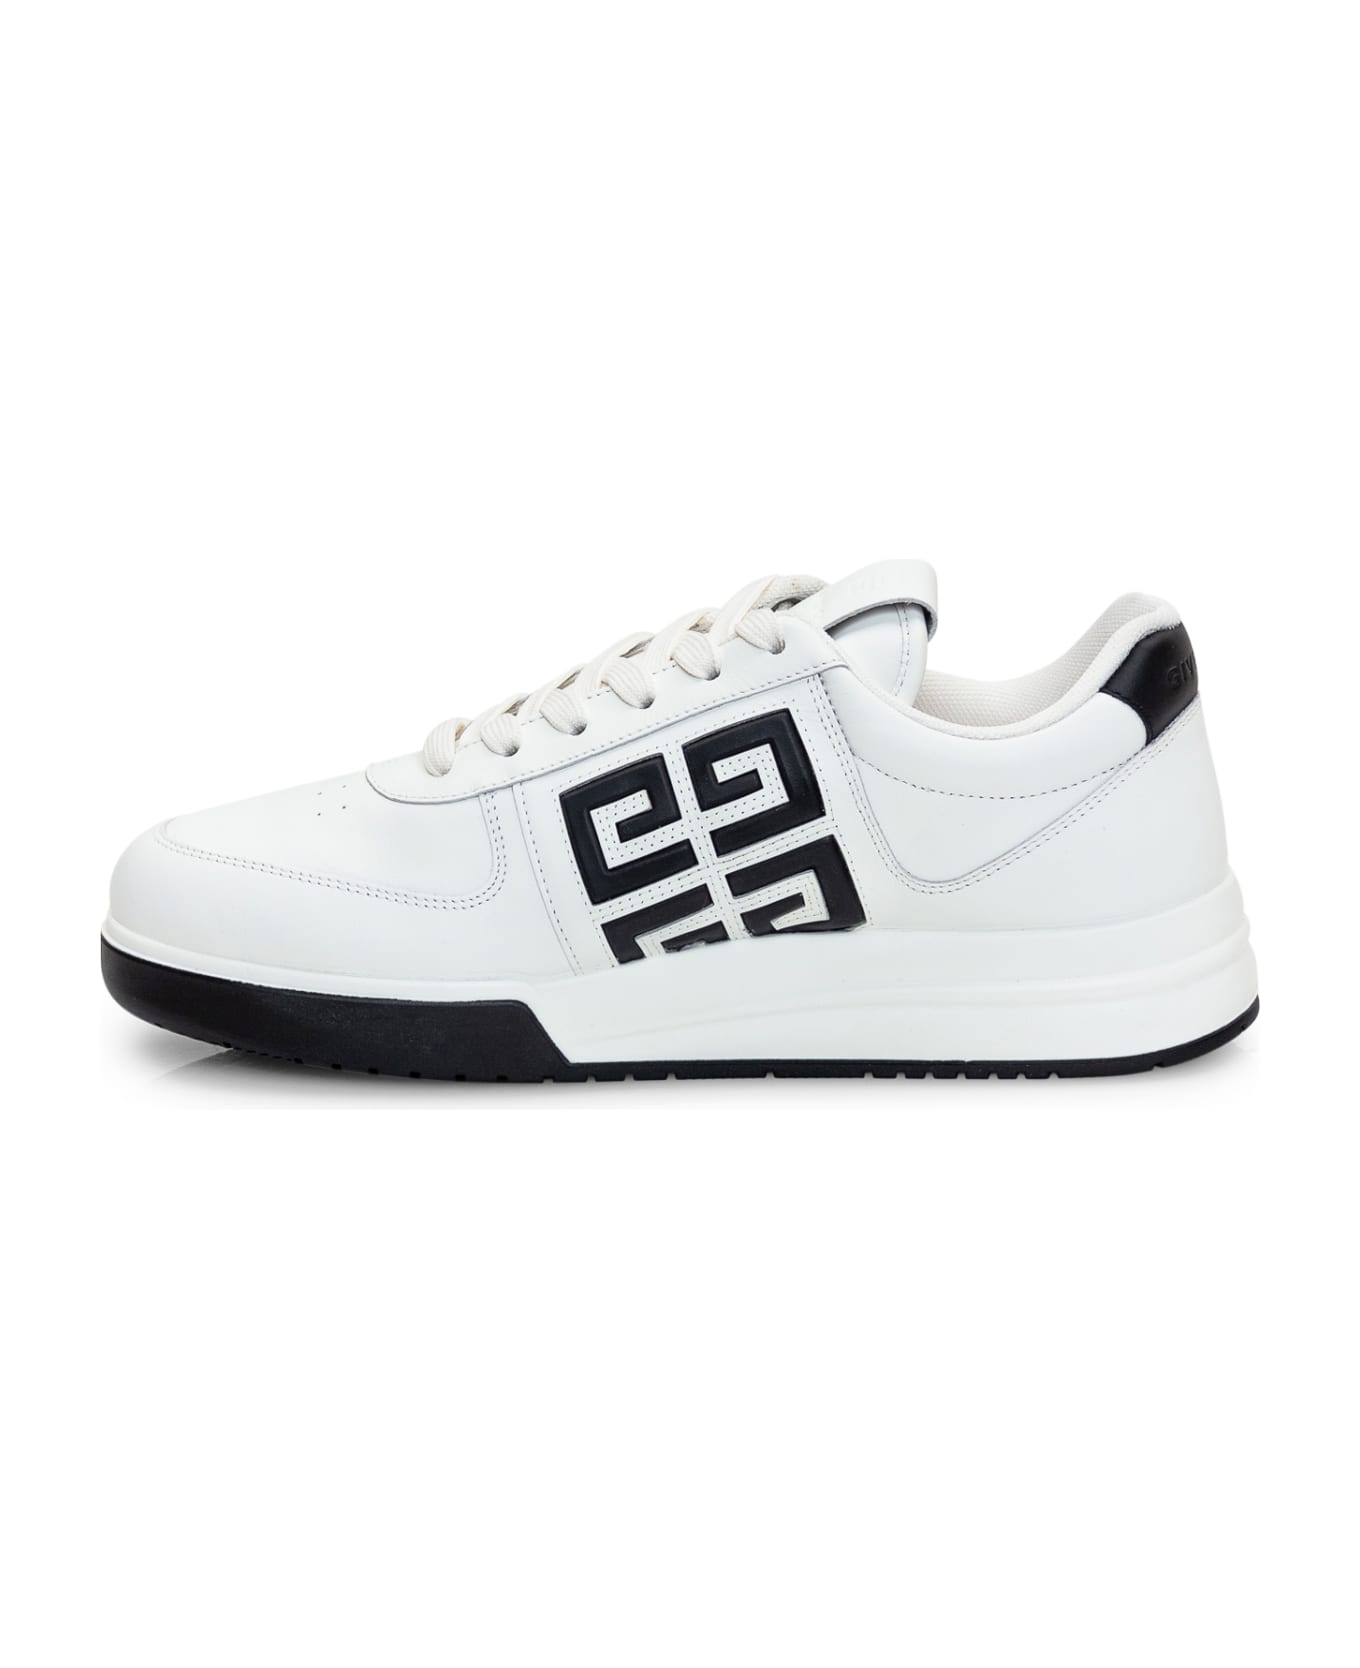 Givenchy White G4 Low Sneakers - White スニーカー